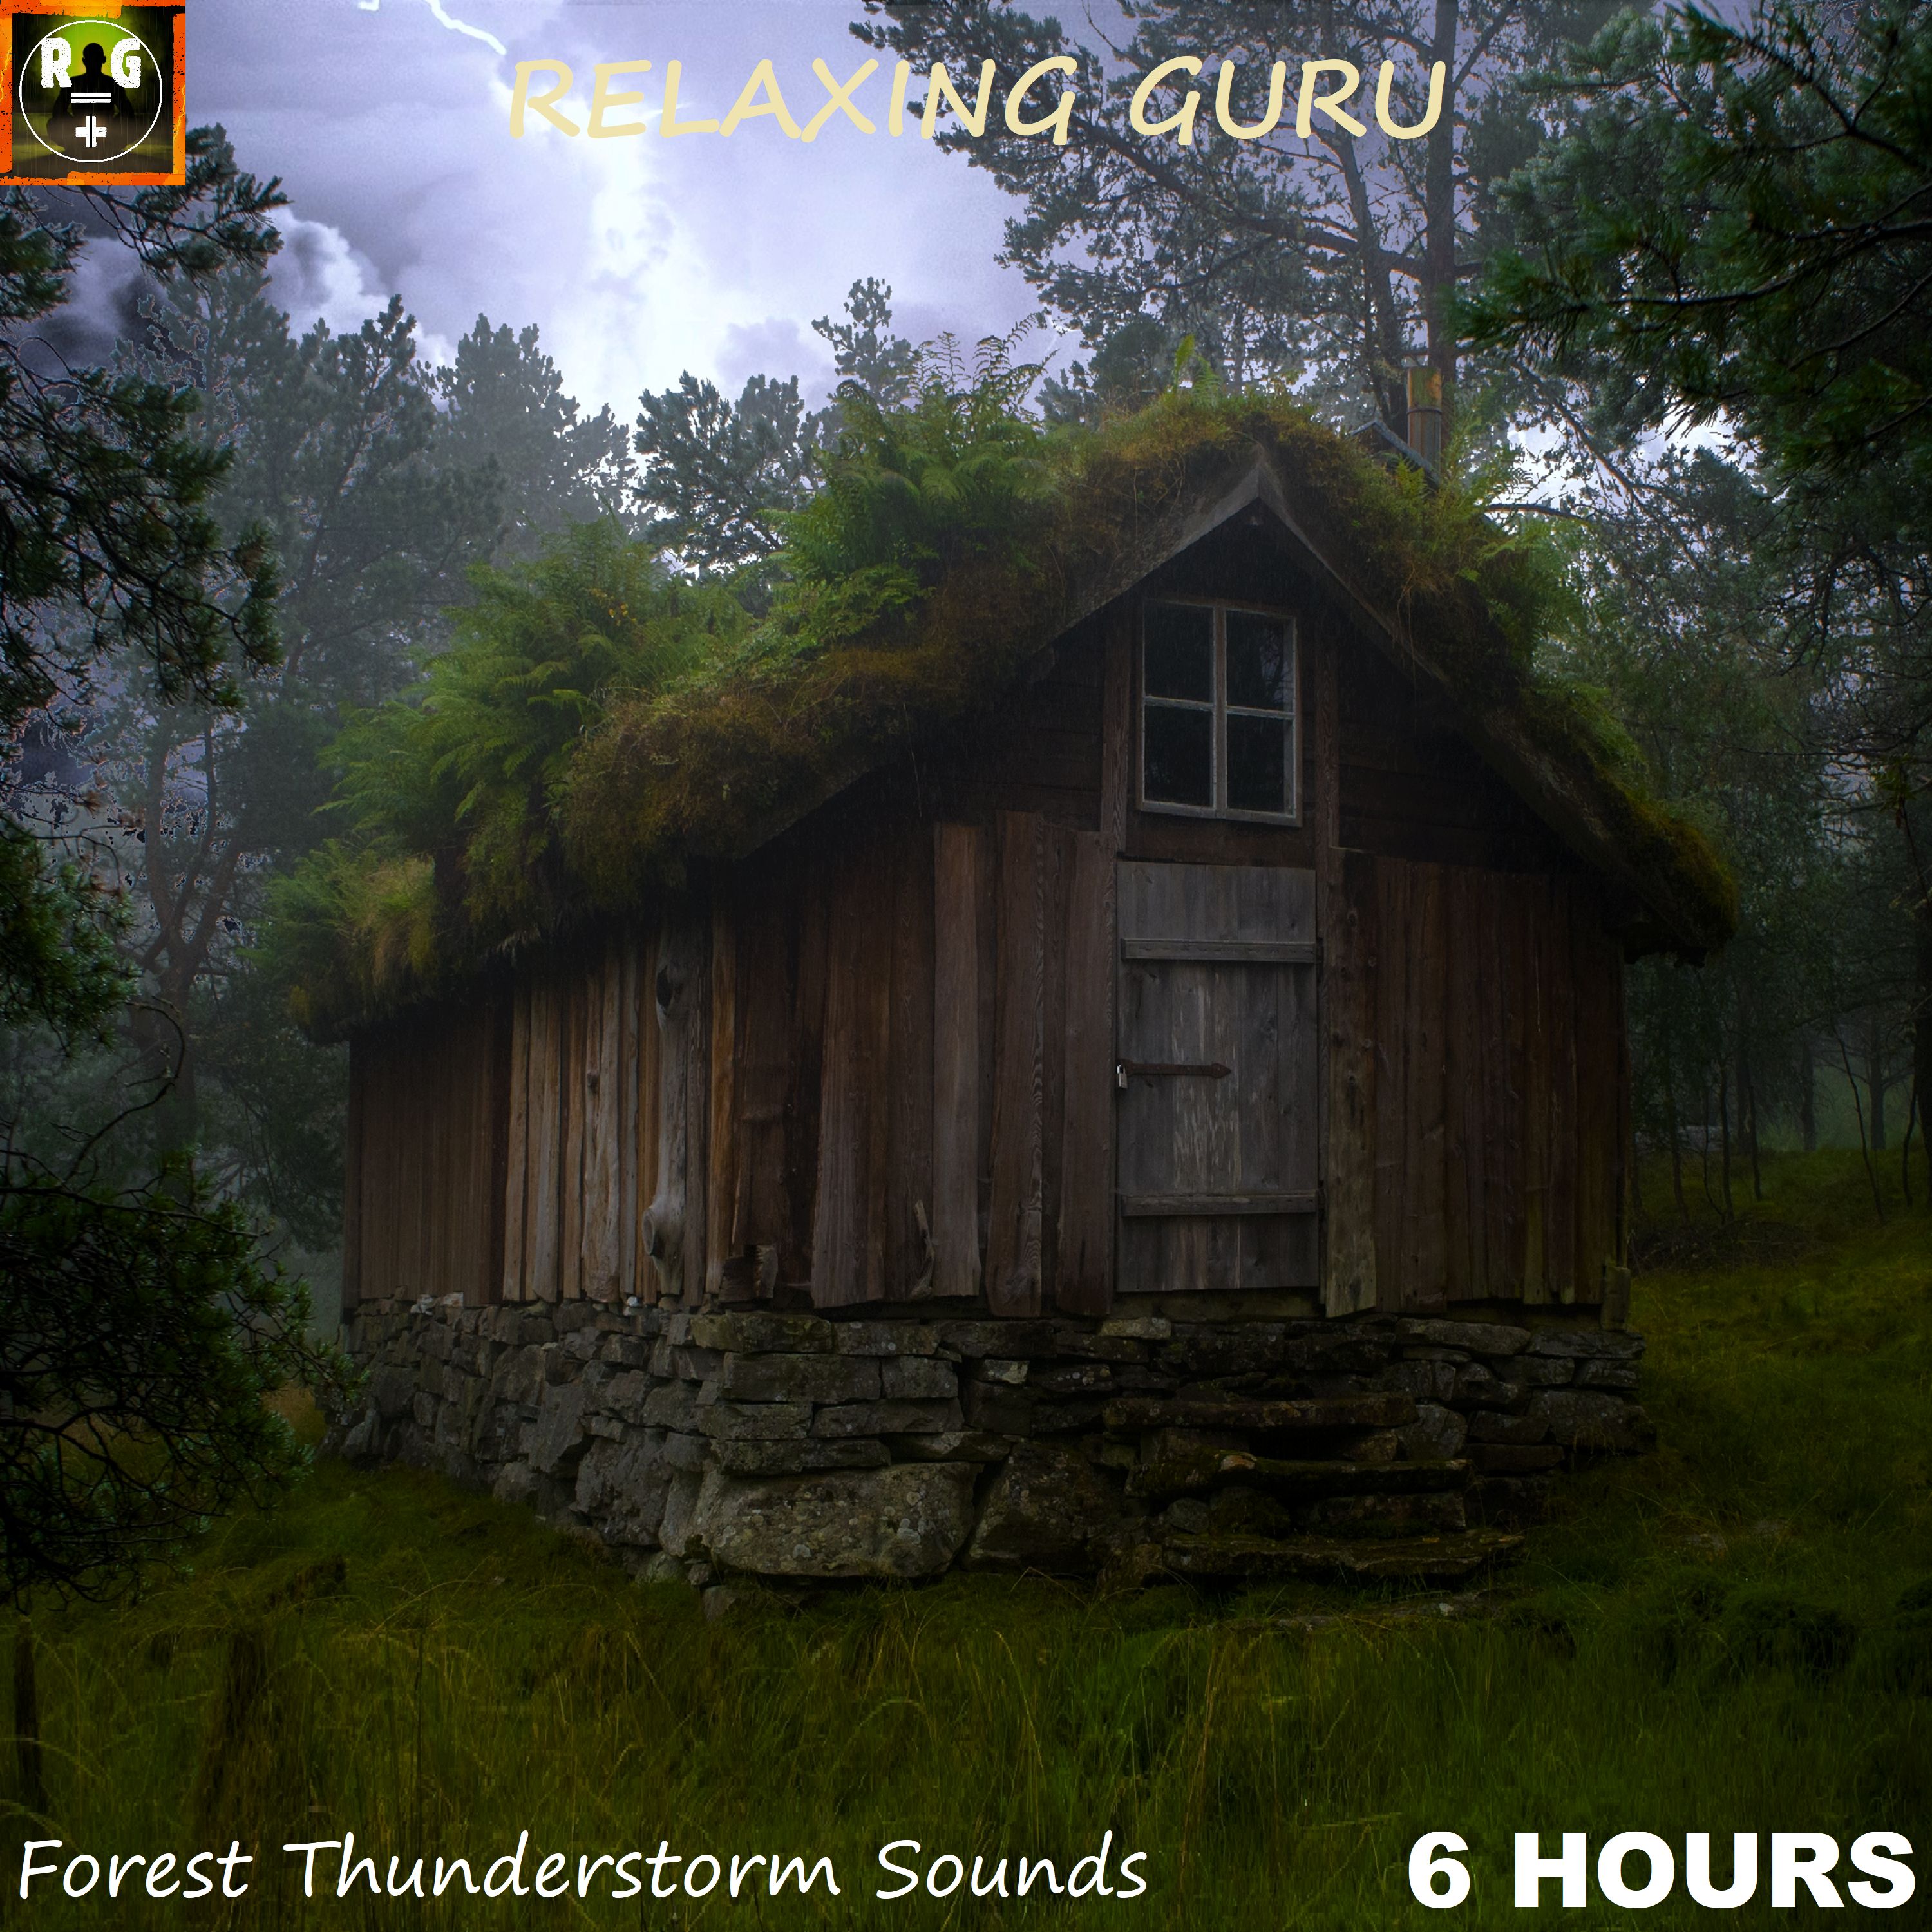 Unduh Relaxing Rain & Thunder on a Wooden Hut deep in the Forest - Thunderstorm Sounds for Sleep (6 HOURS)